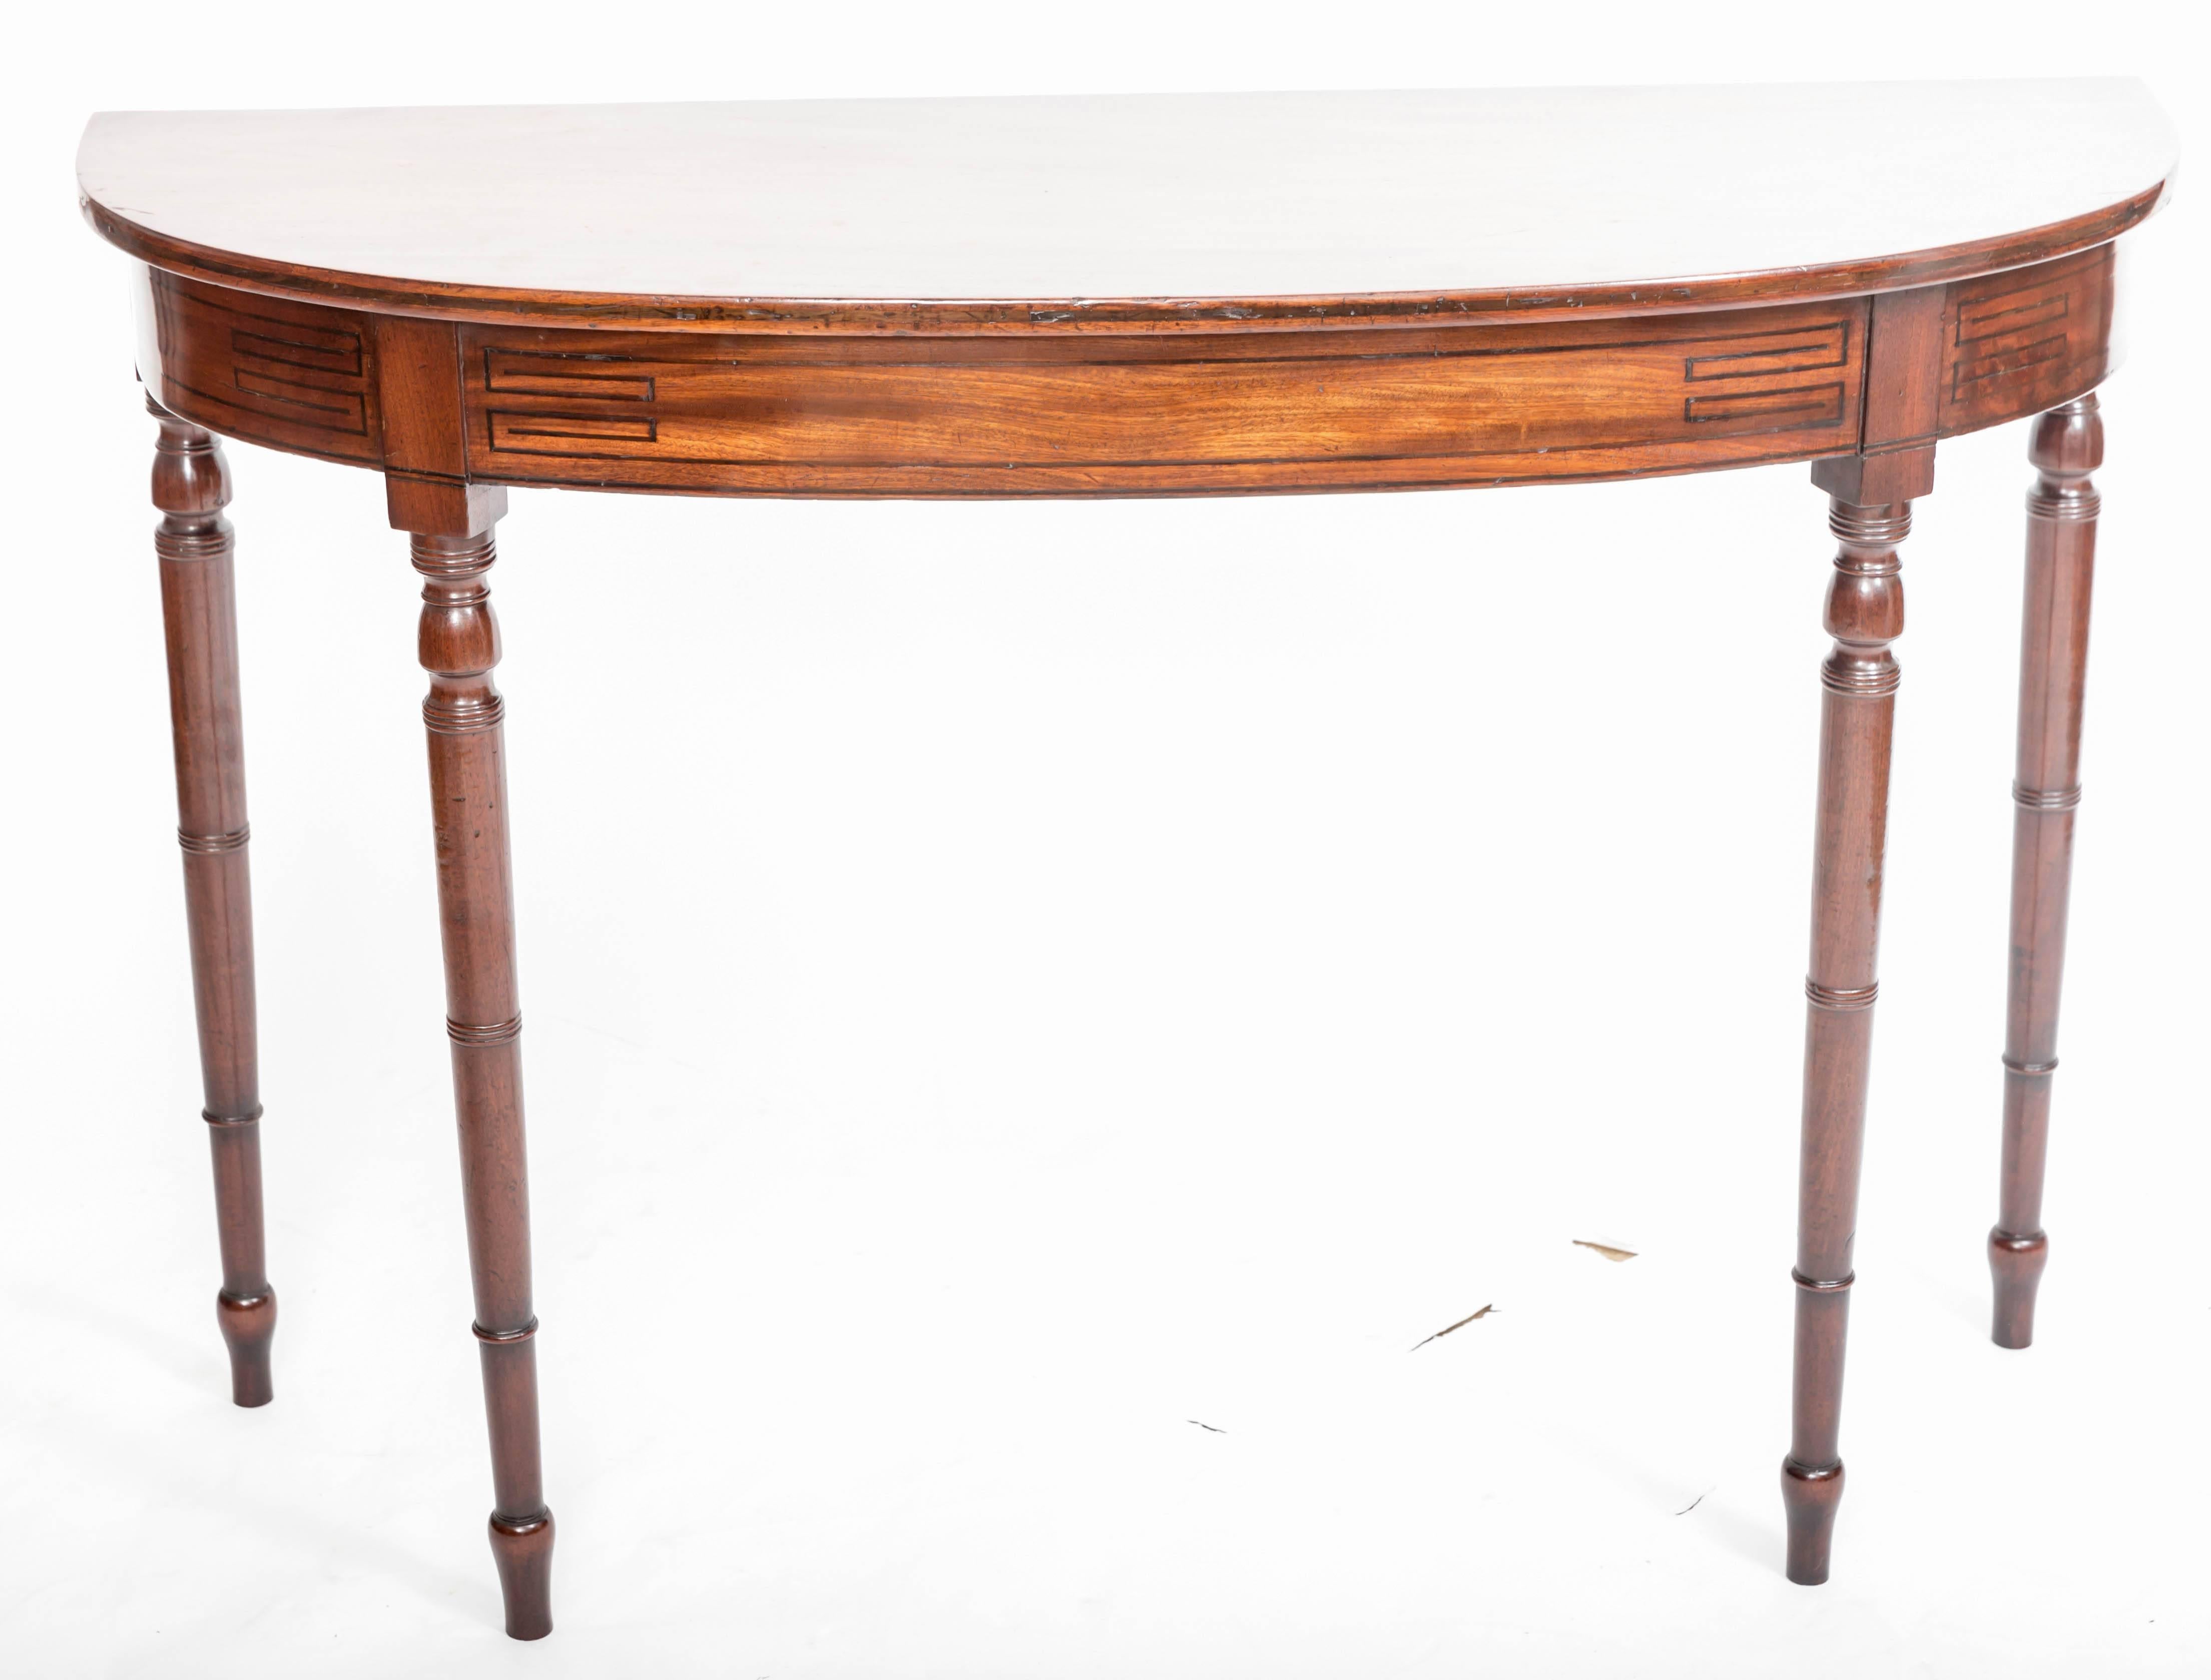 Mahogany demilune table with turned legs and with 3 1/2" apron with
decorative ebony inserts.Measures: 46".